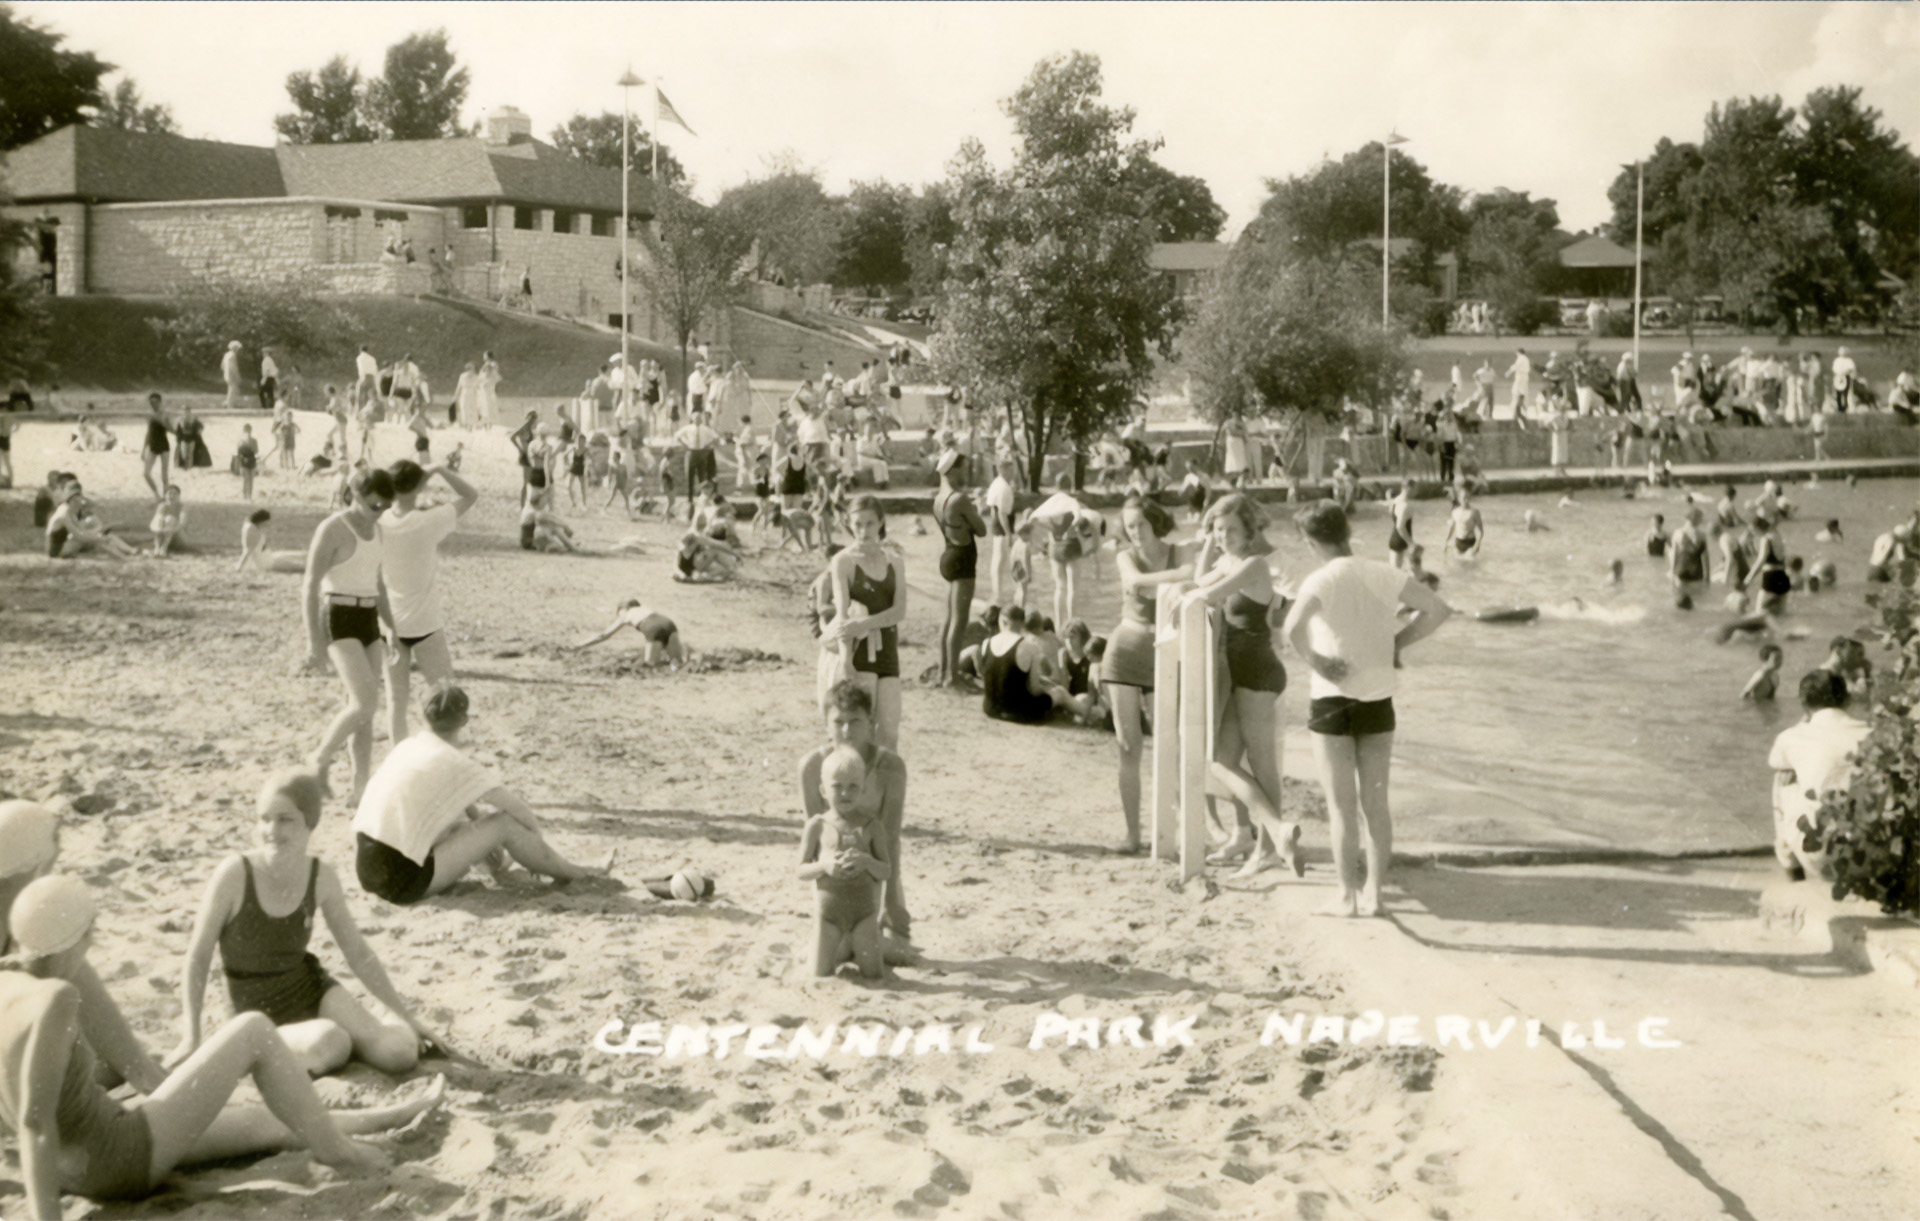 Centennial Beach was segregated from its opening in 1932 until the 1950s. This was not a formal policy, but a custom that successfully kept Black swimmers out of the Beach. The first attempt to desegregate the Beach occurred in 1946.